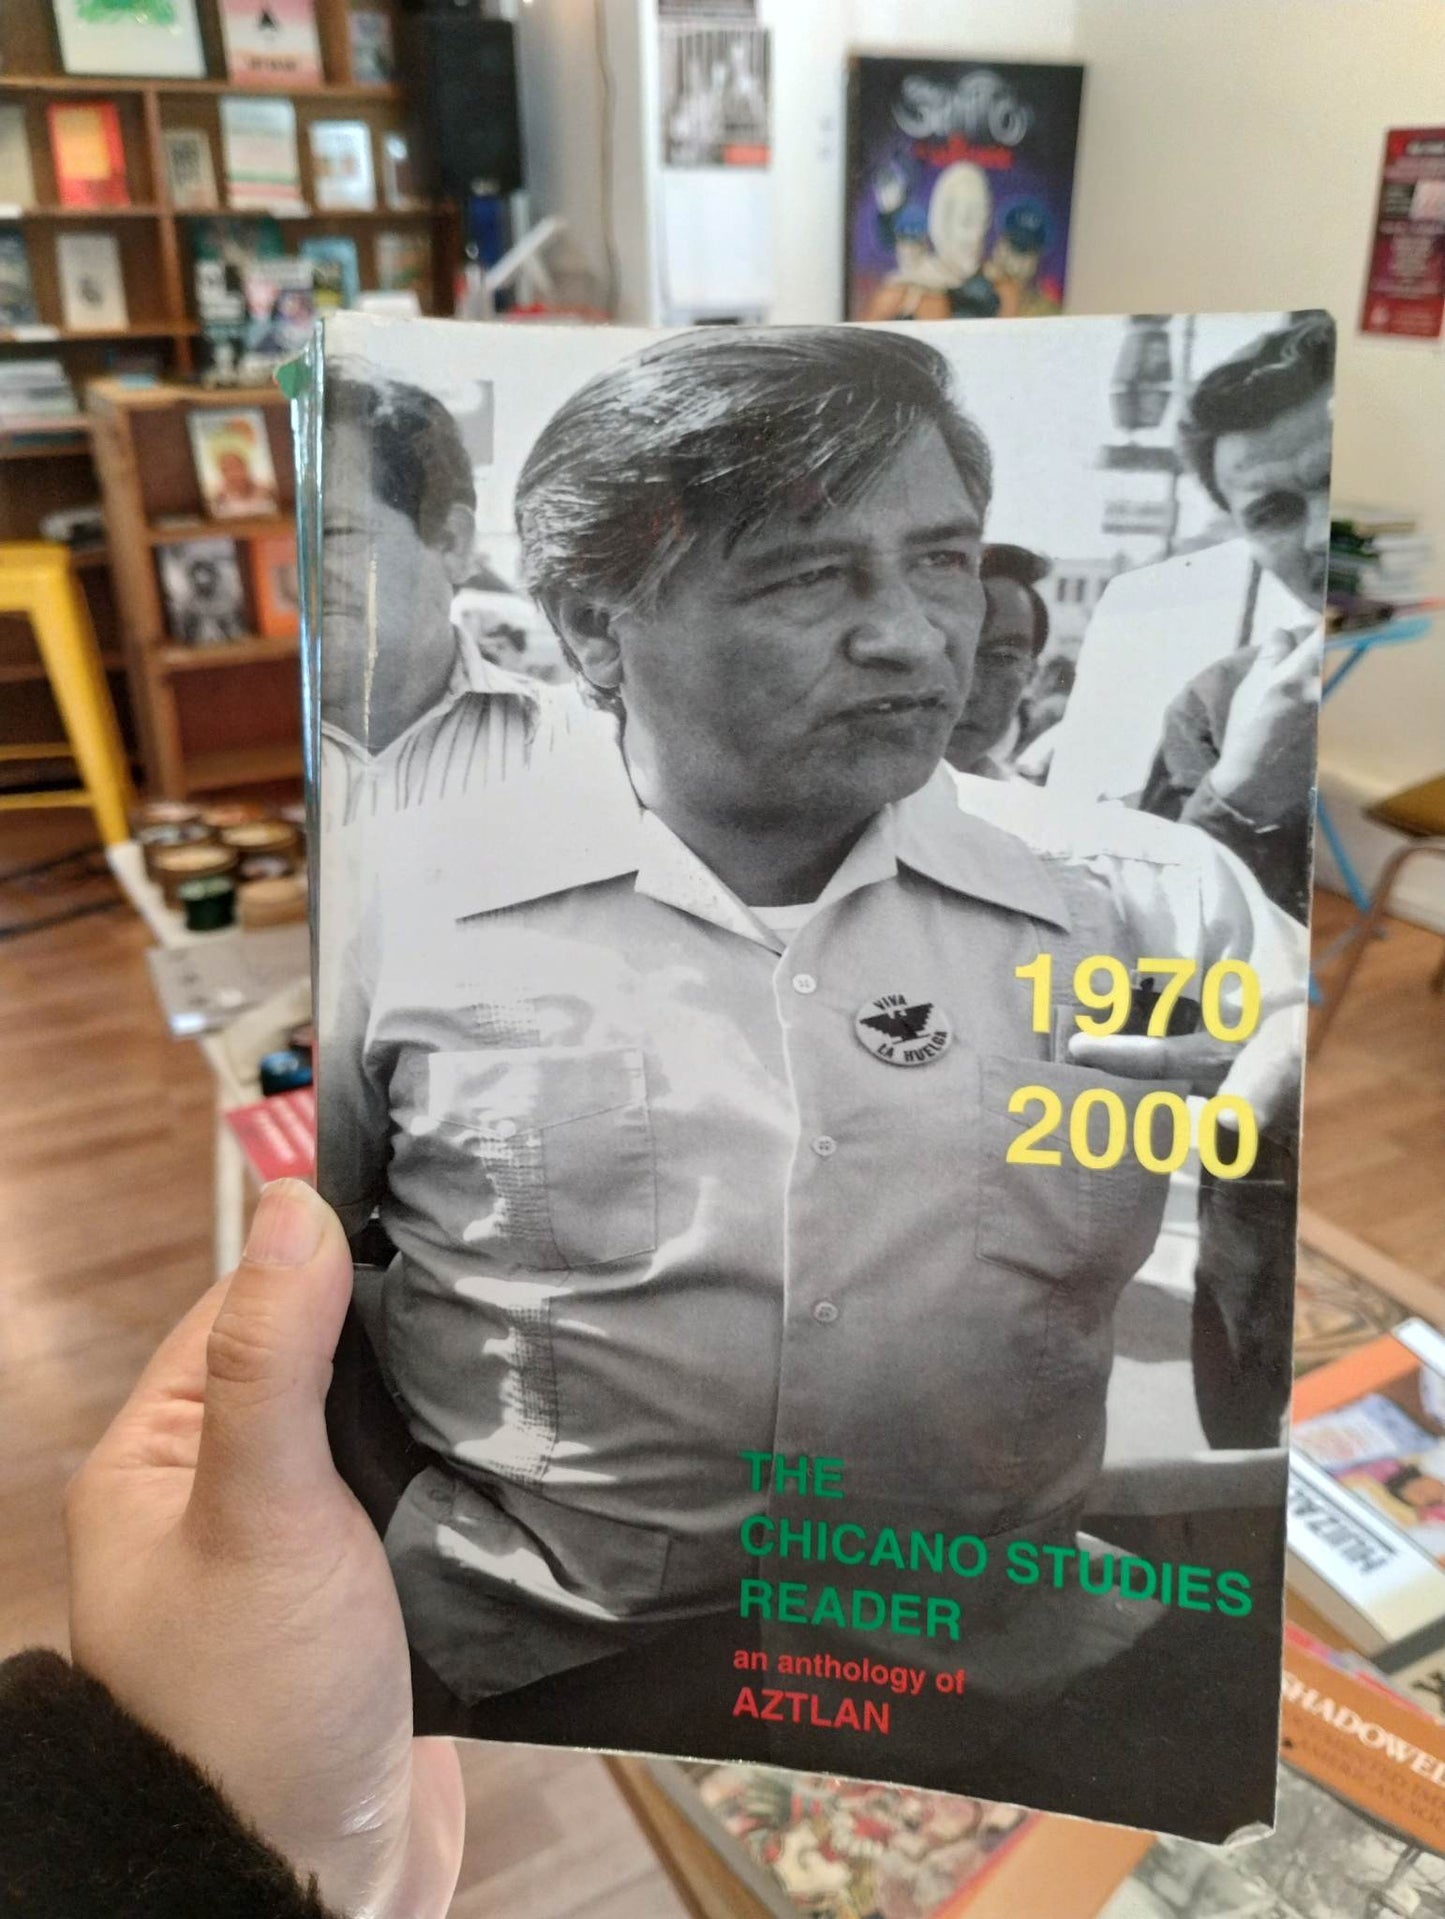 The Chicano Studies Reader: an anthology of Aztlan (1970-2000)